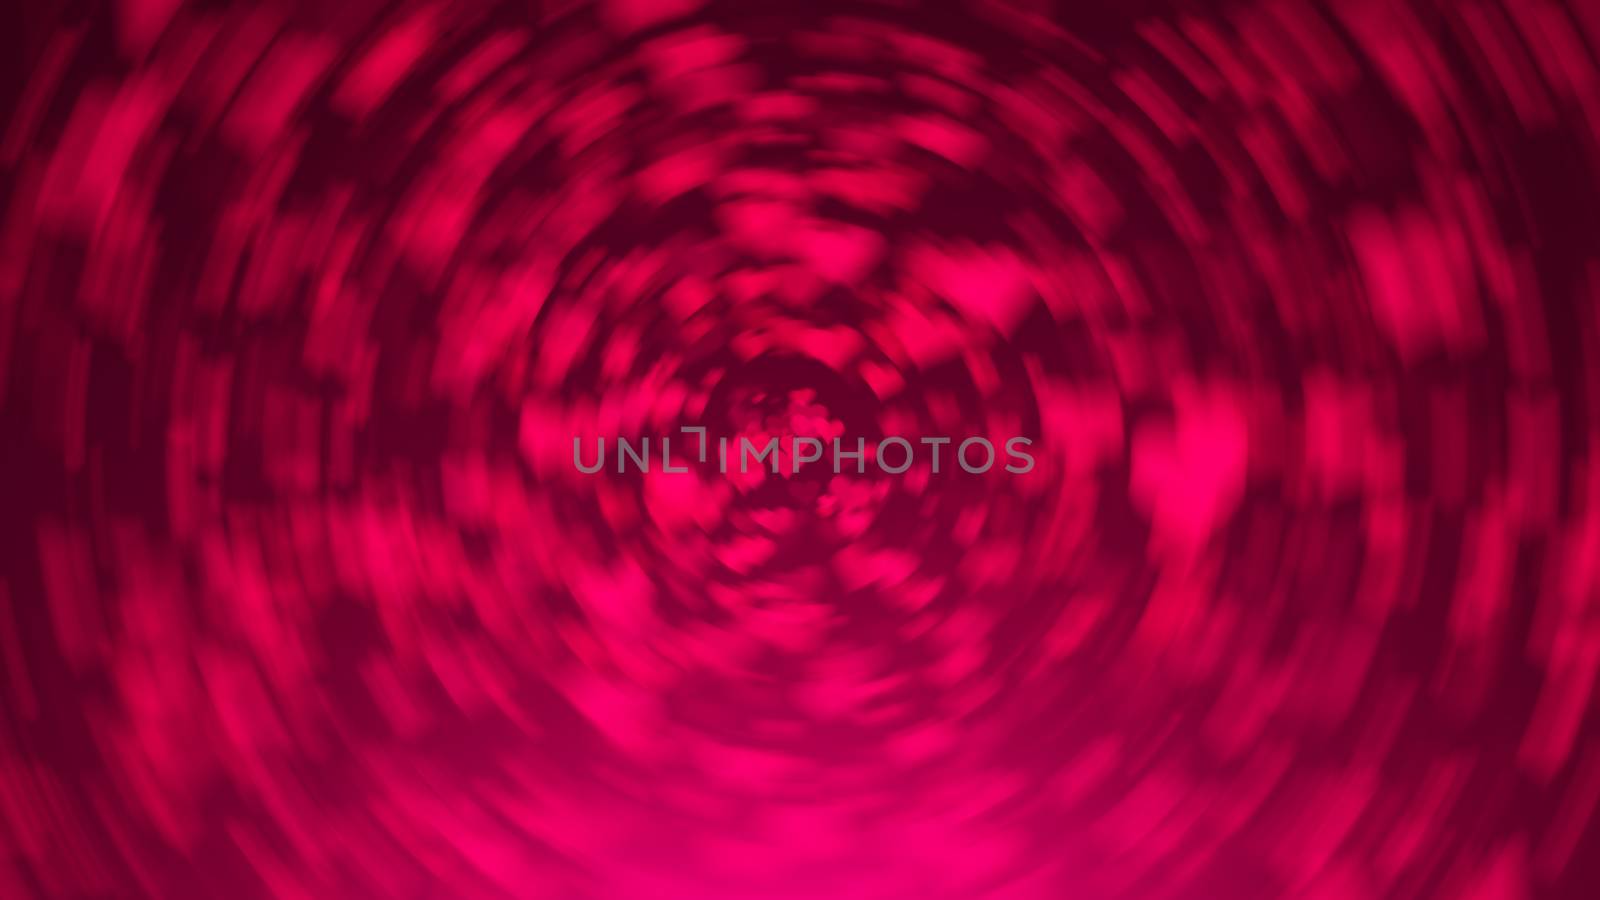 Abstract background with radial blur hearts. Digital illustration. 3d rendering